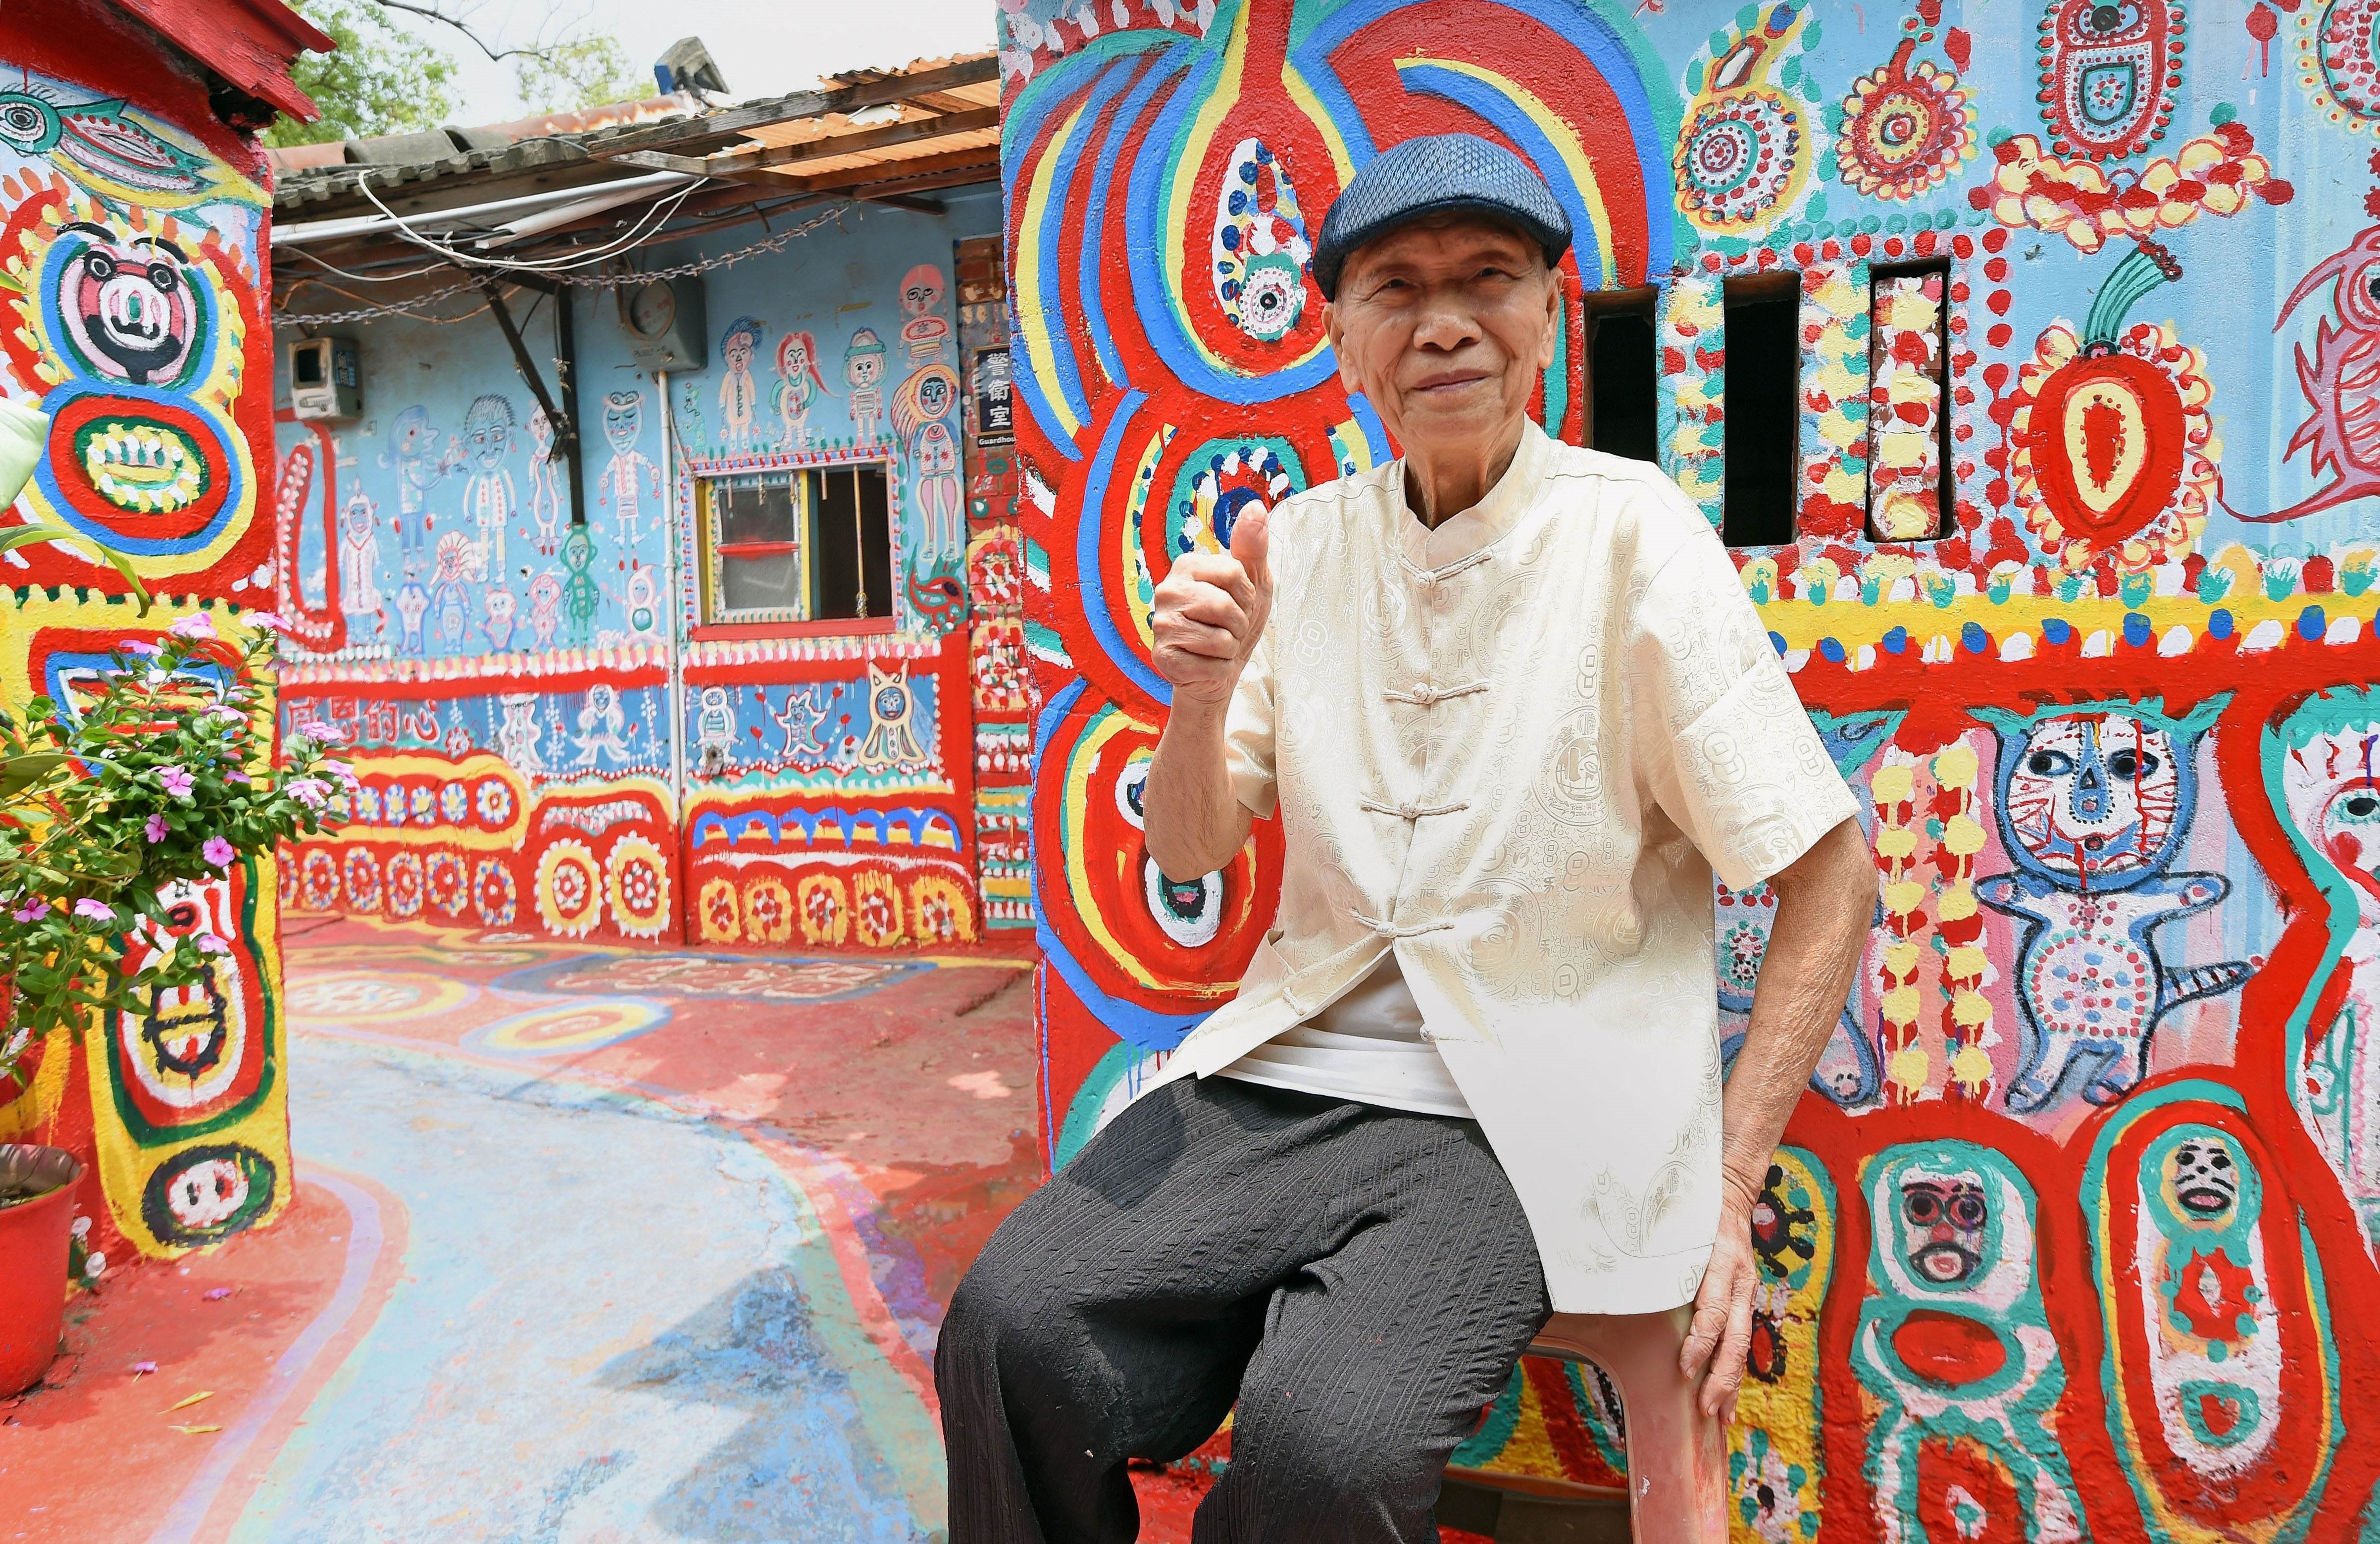 Huang Yung-fu posing for a photo next to his artwork in the Rainbow Village. Photo: AFP